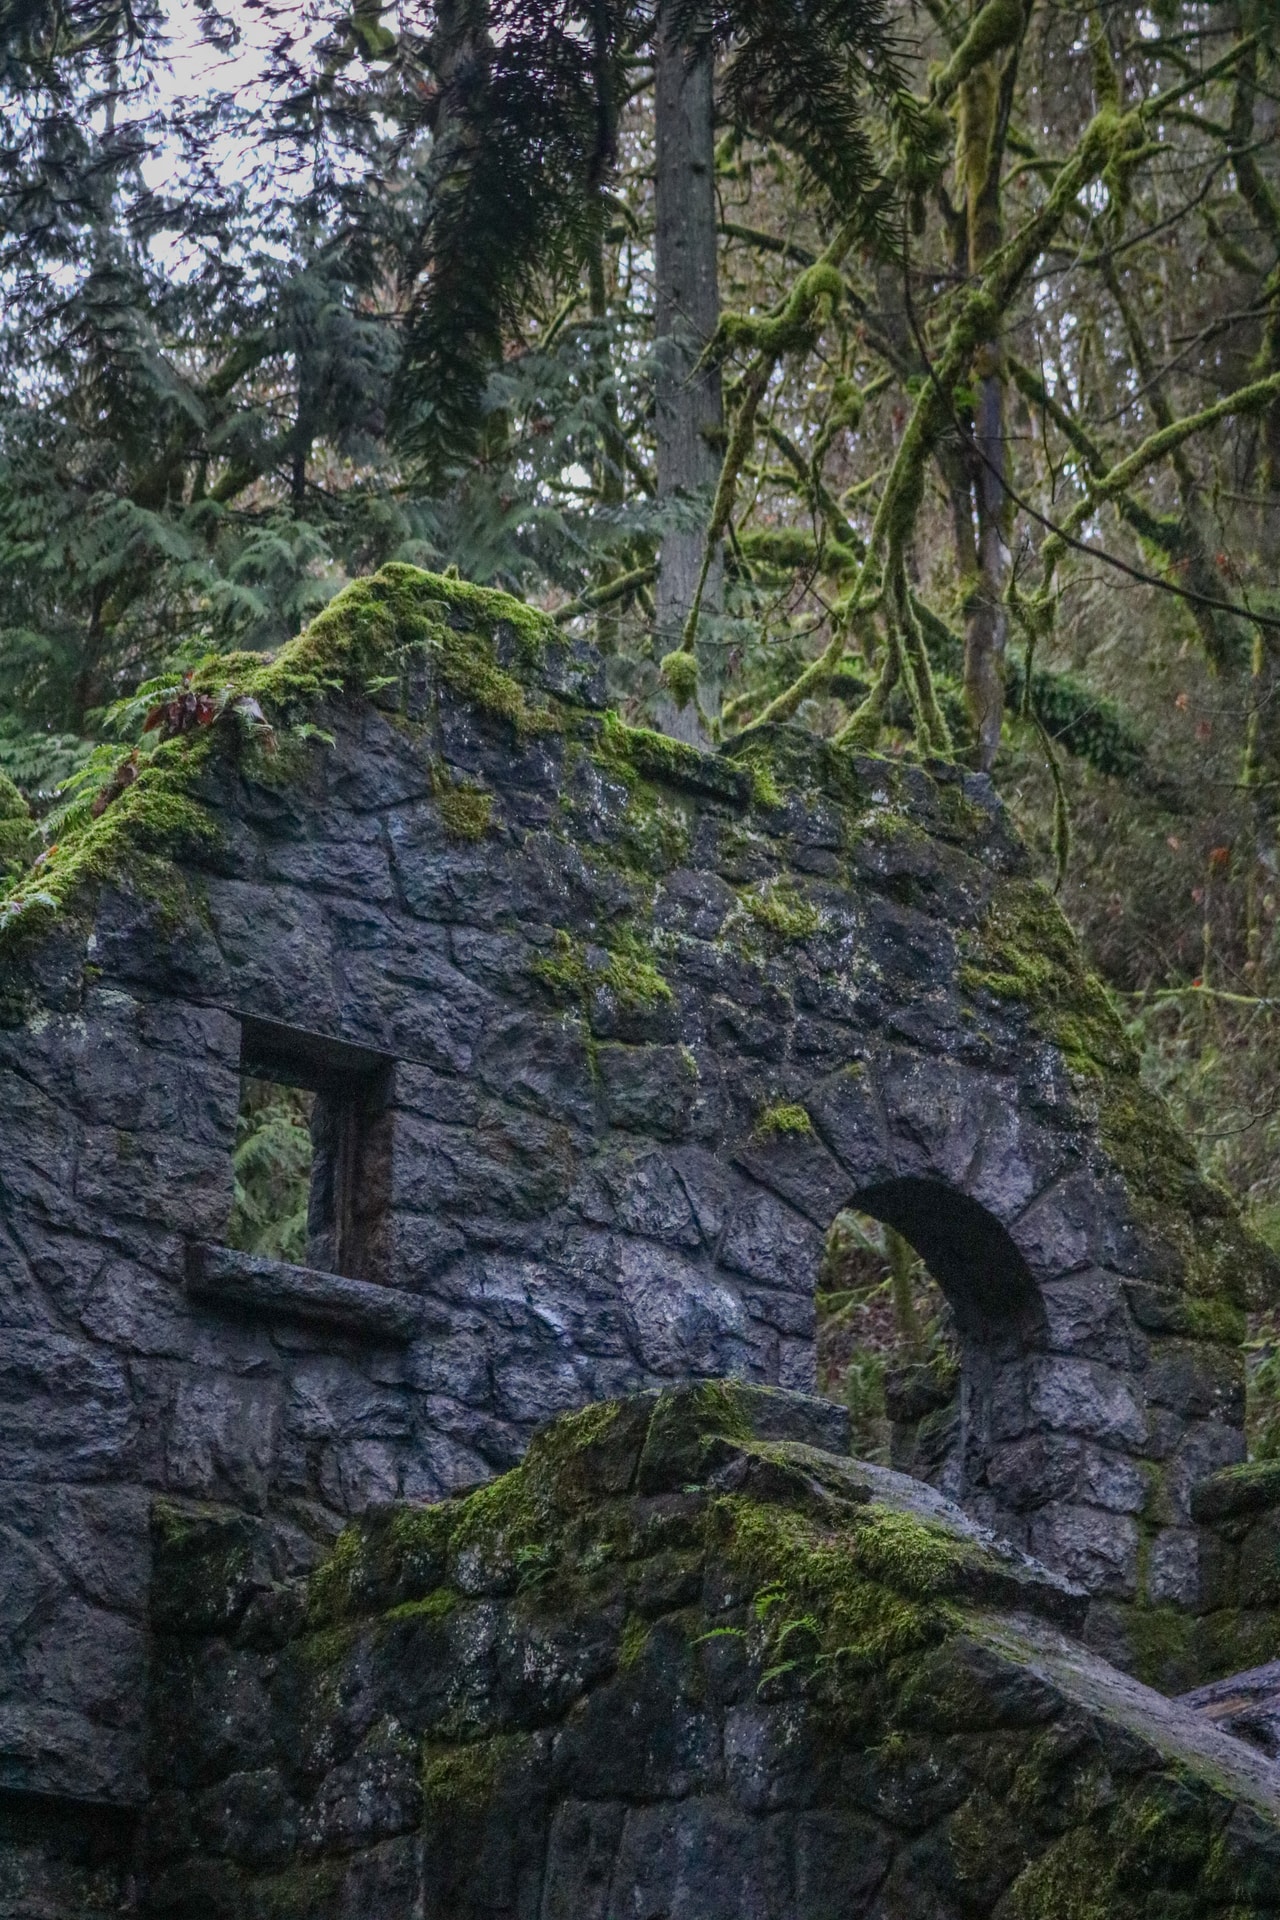 Stone House, Lower MacLeay Trail in Forest Park, Day Hikes Near Portland, Oregon